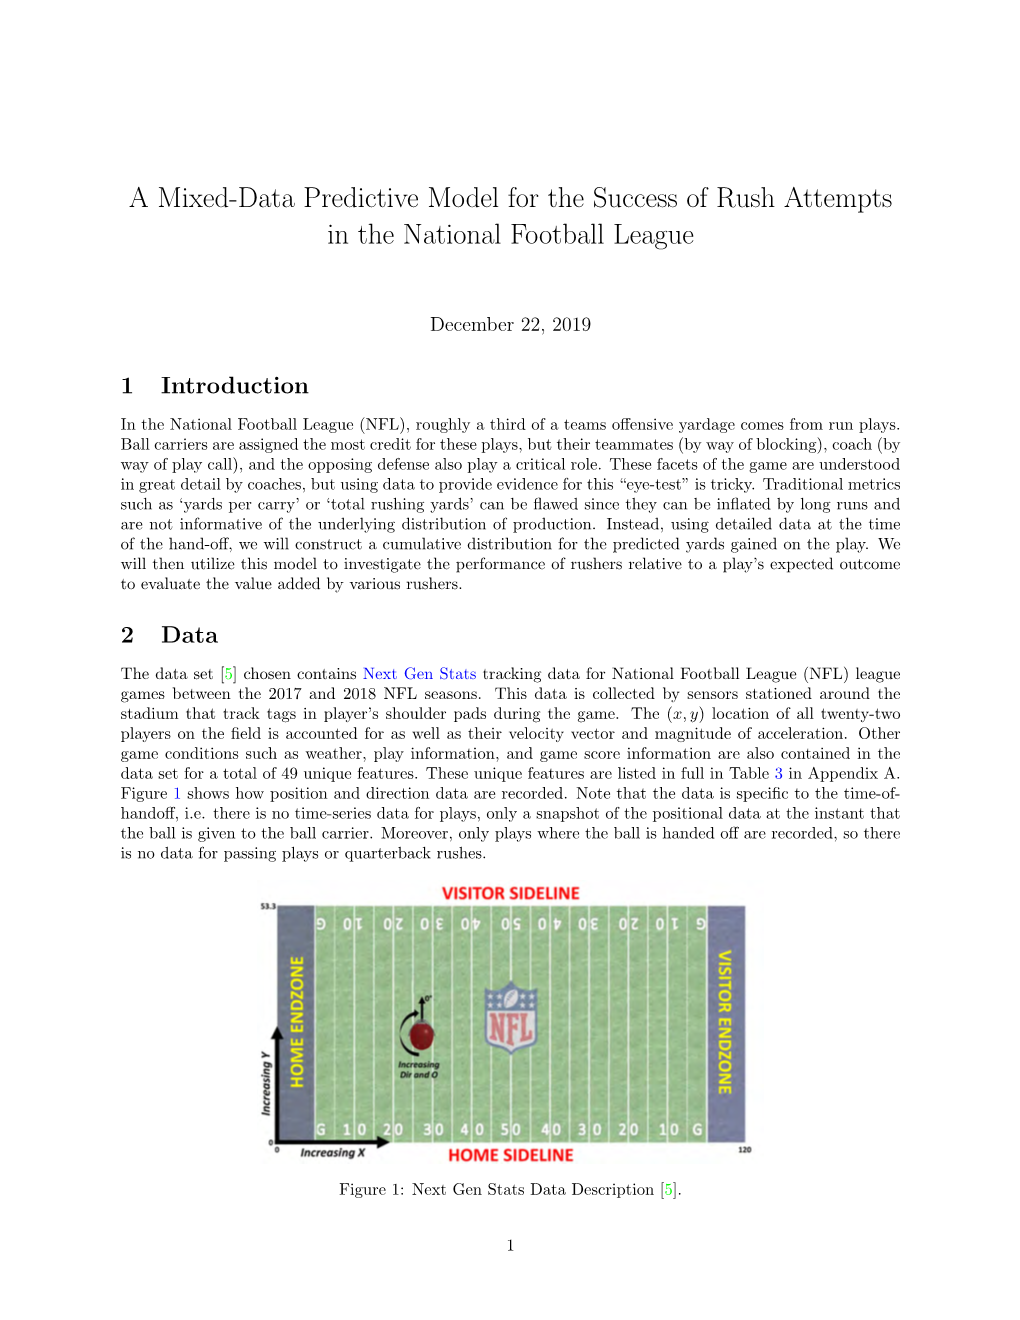 A Mixed-Data Predictive Model for the Success of Rush Attempts in the National Football League